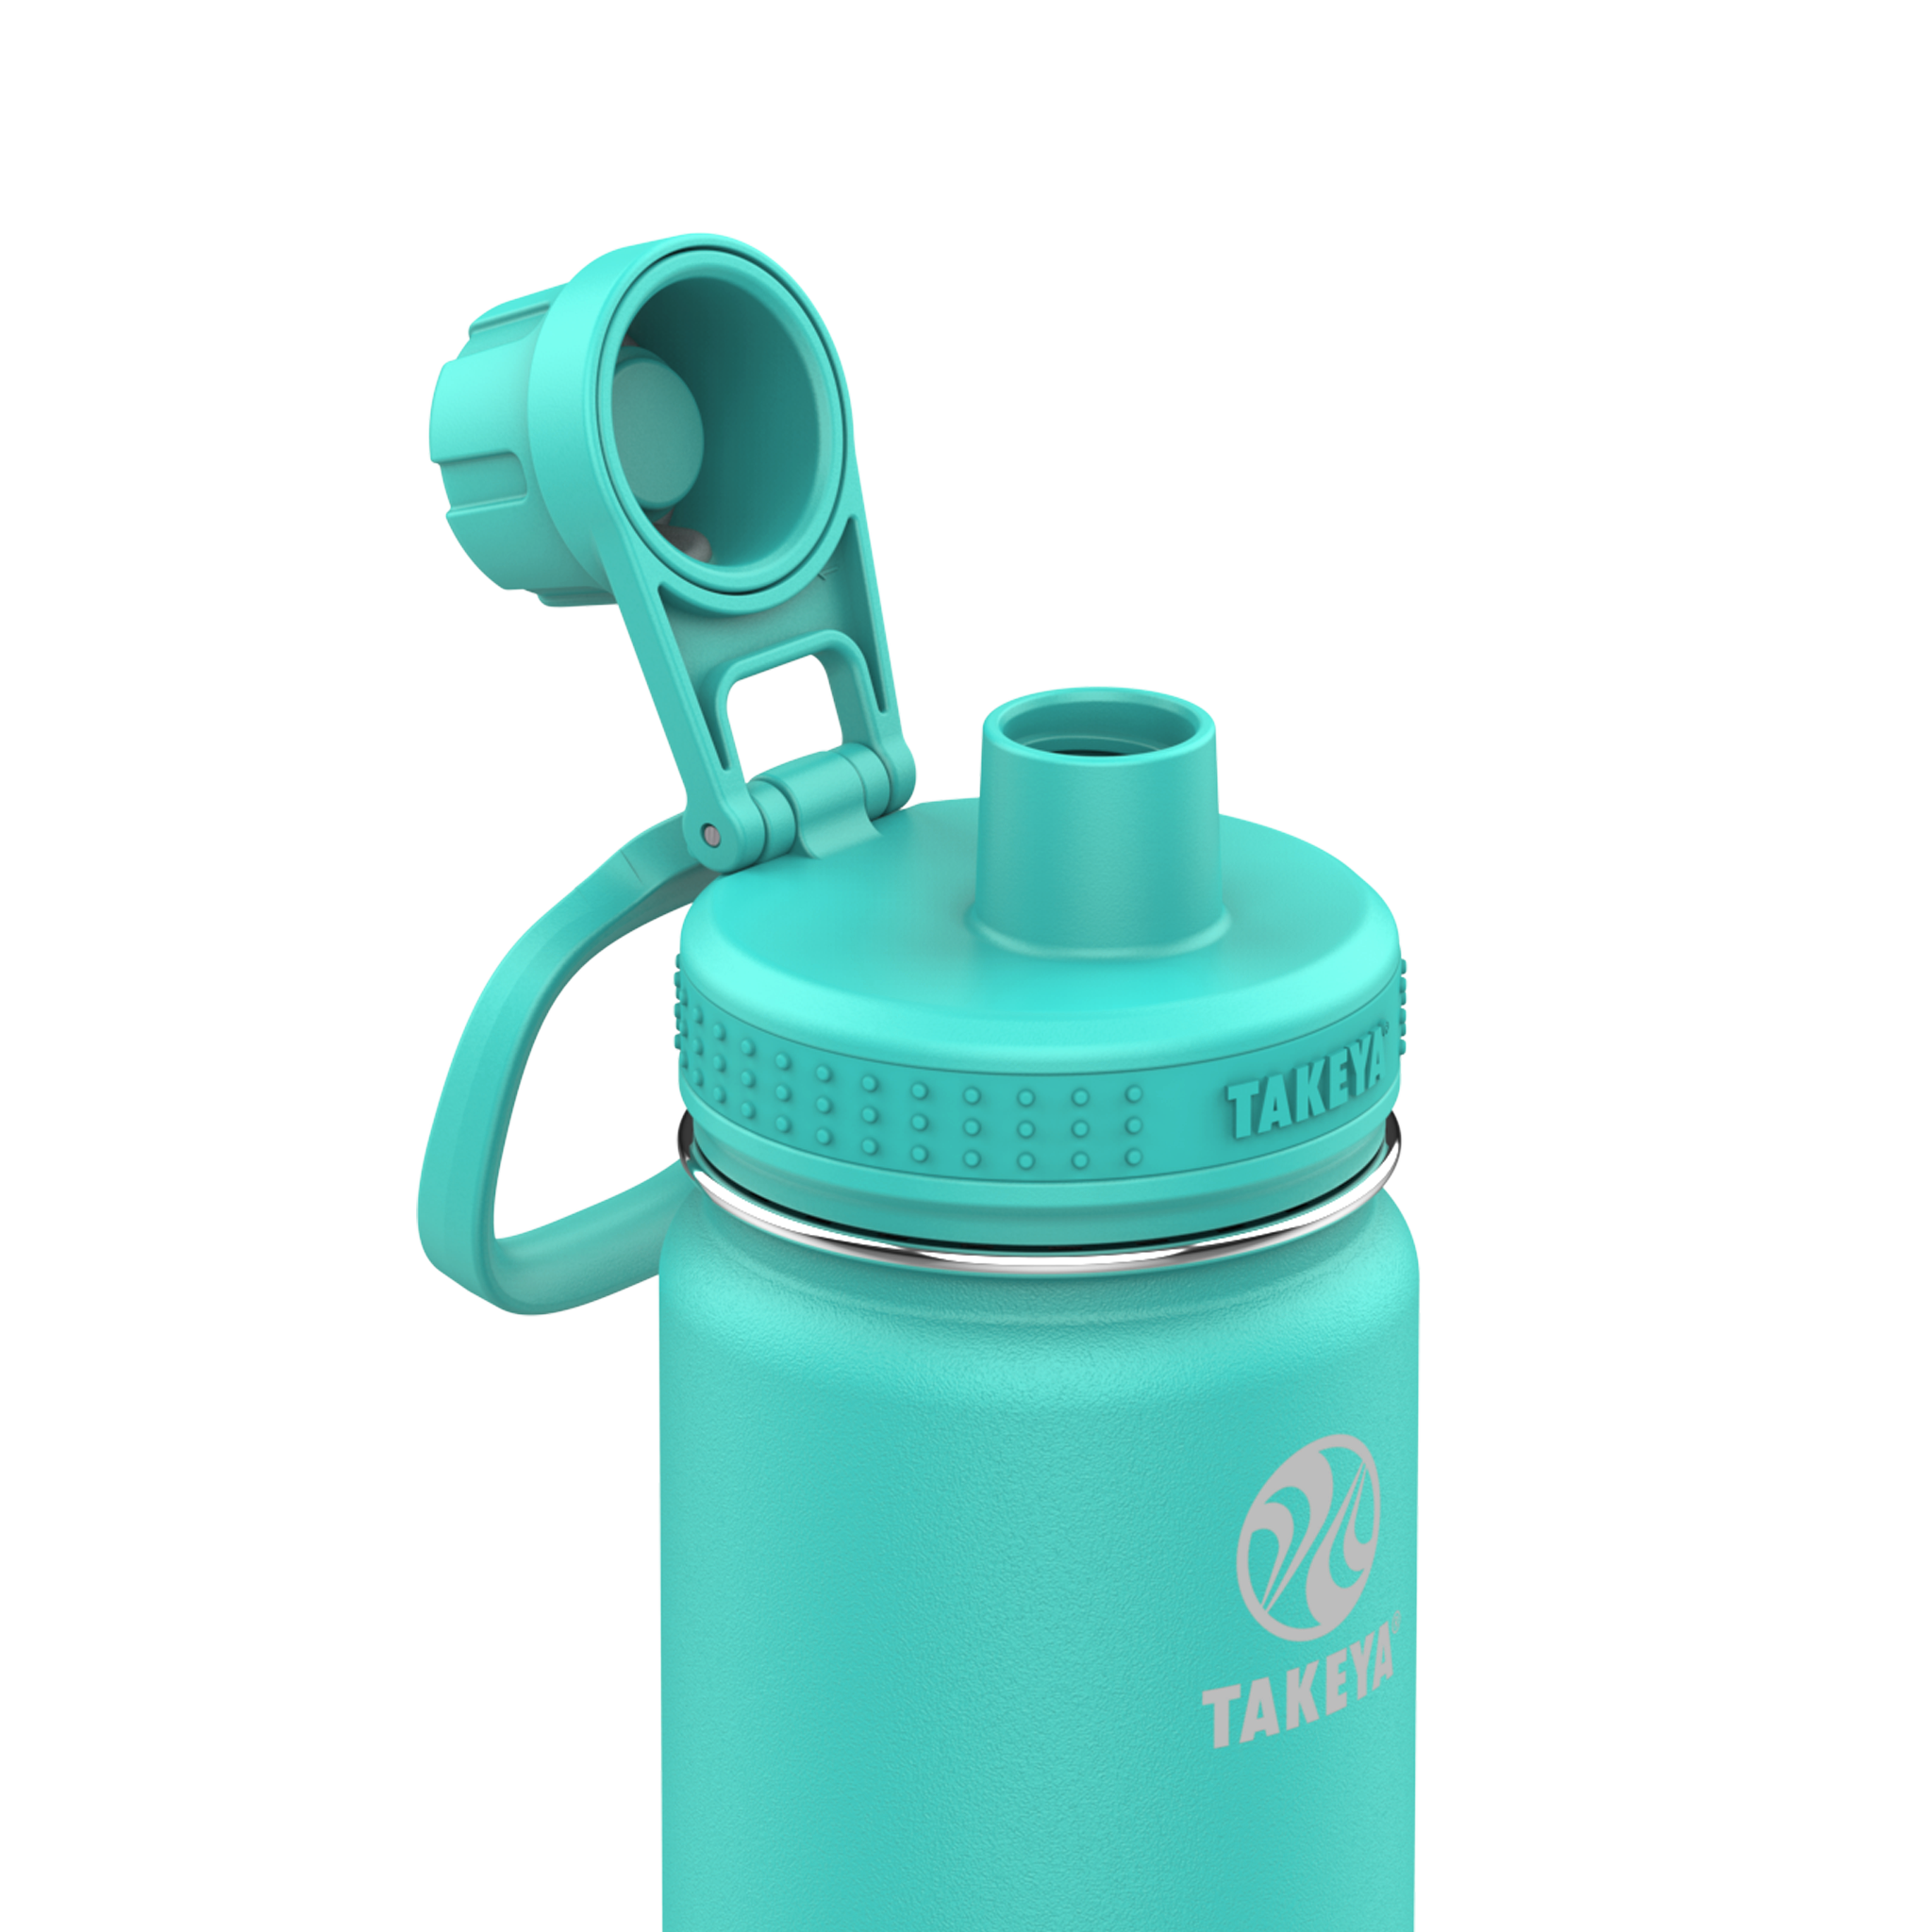 Takeya 18 Oz Teal Actives Insulated Water Bottle - 51068